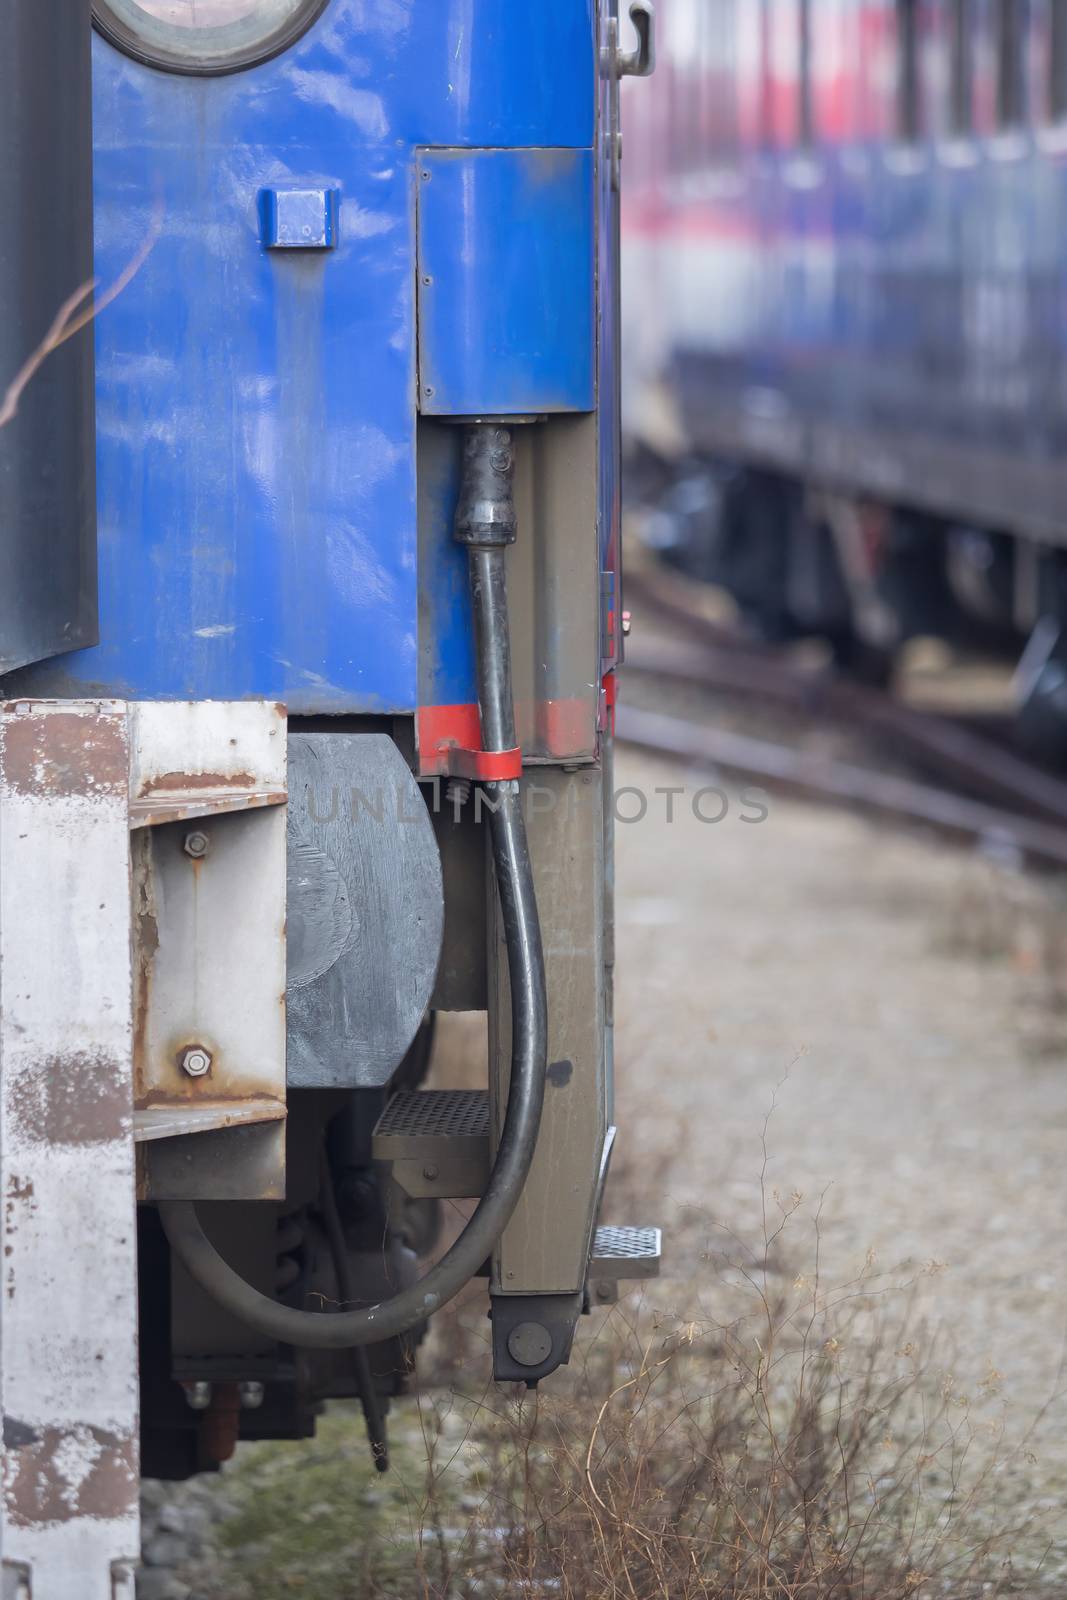 A partial view of a wagon at the train station by sandra_fotodesign